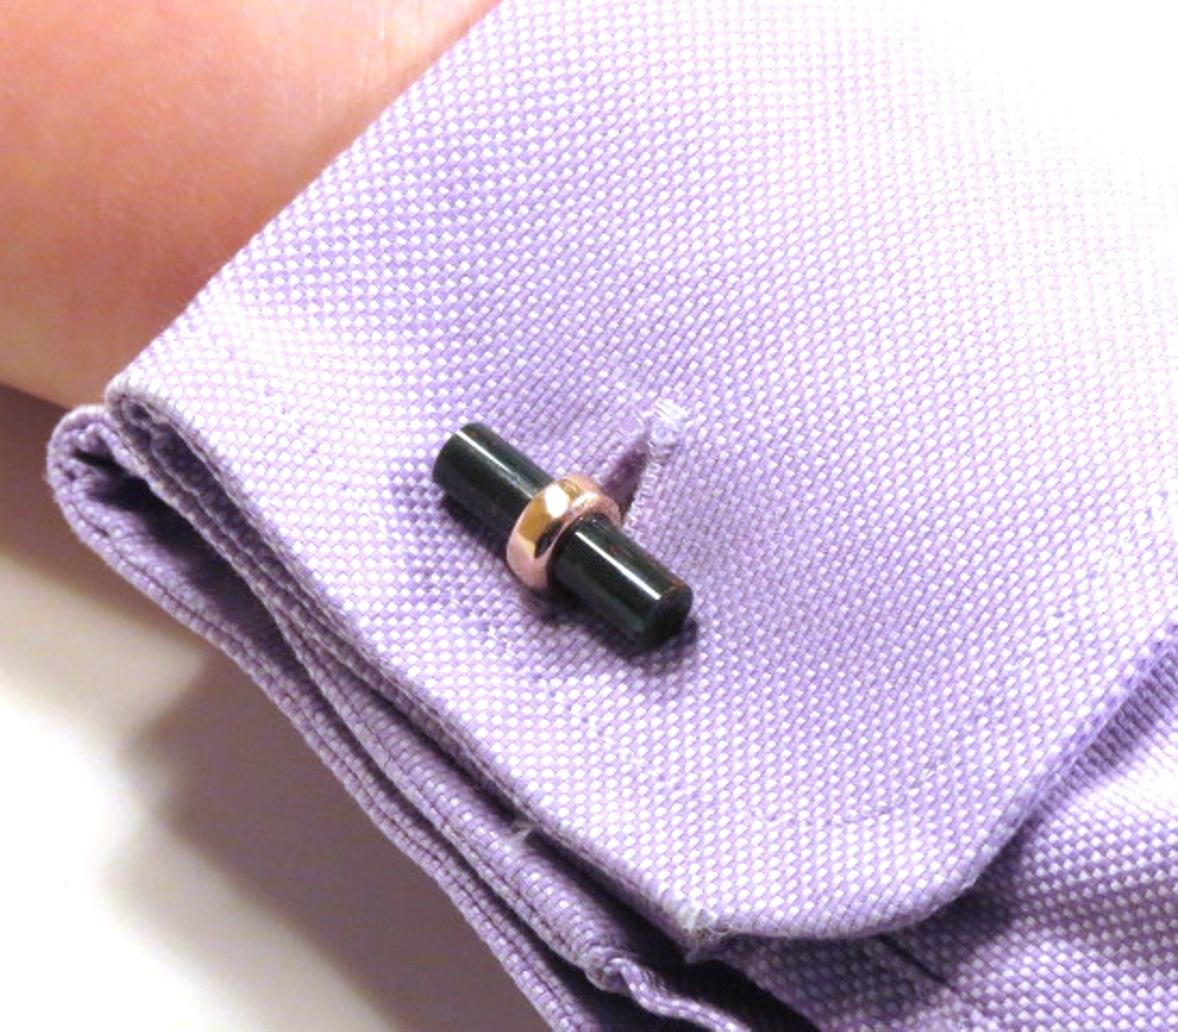 Modern Rose Gold Bloodstone Cufflinks Handcrafted in Italy by Botta Gioielli